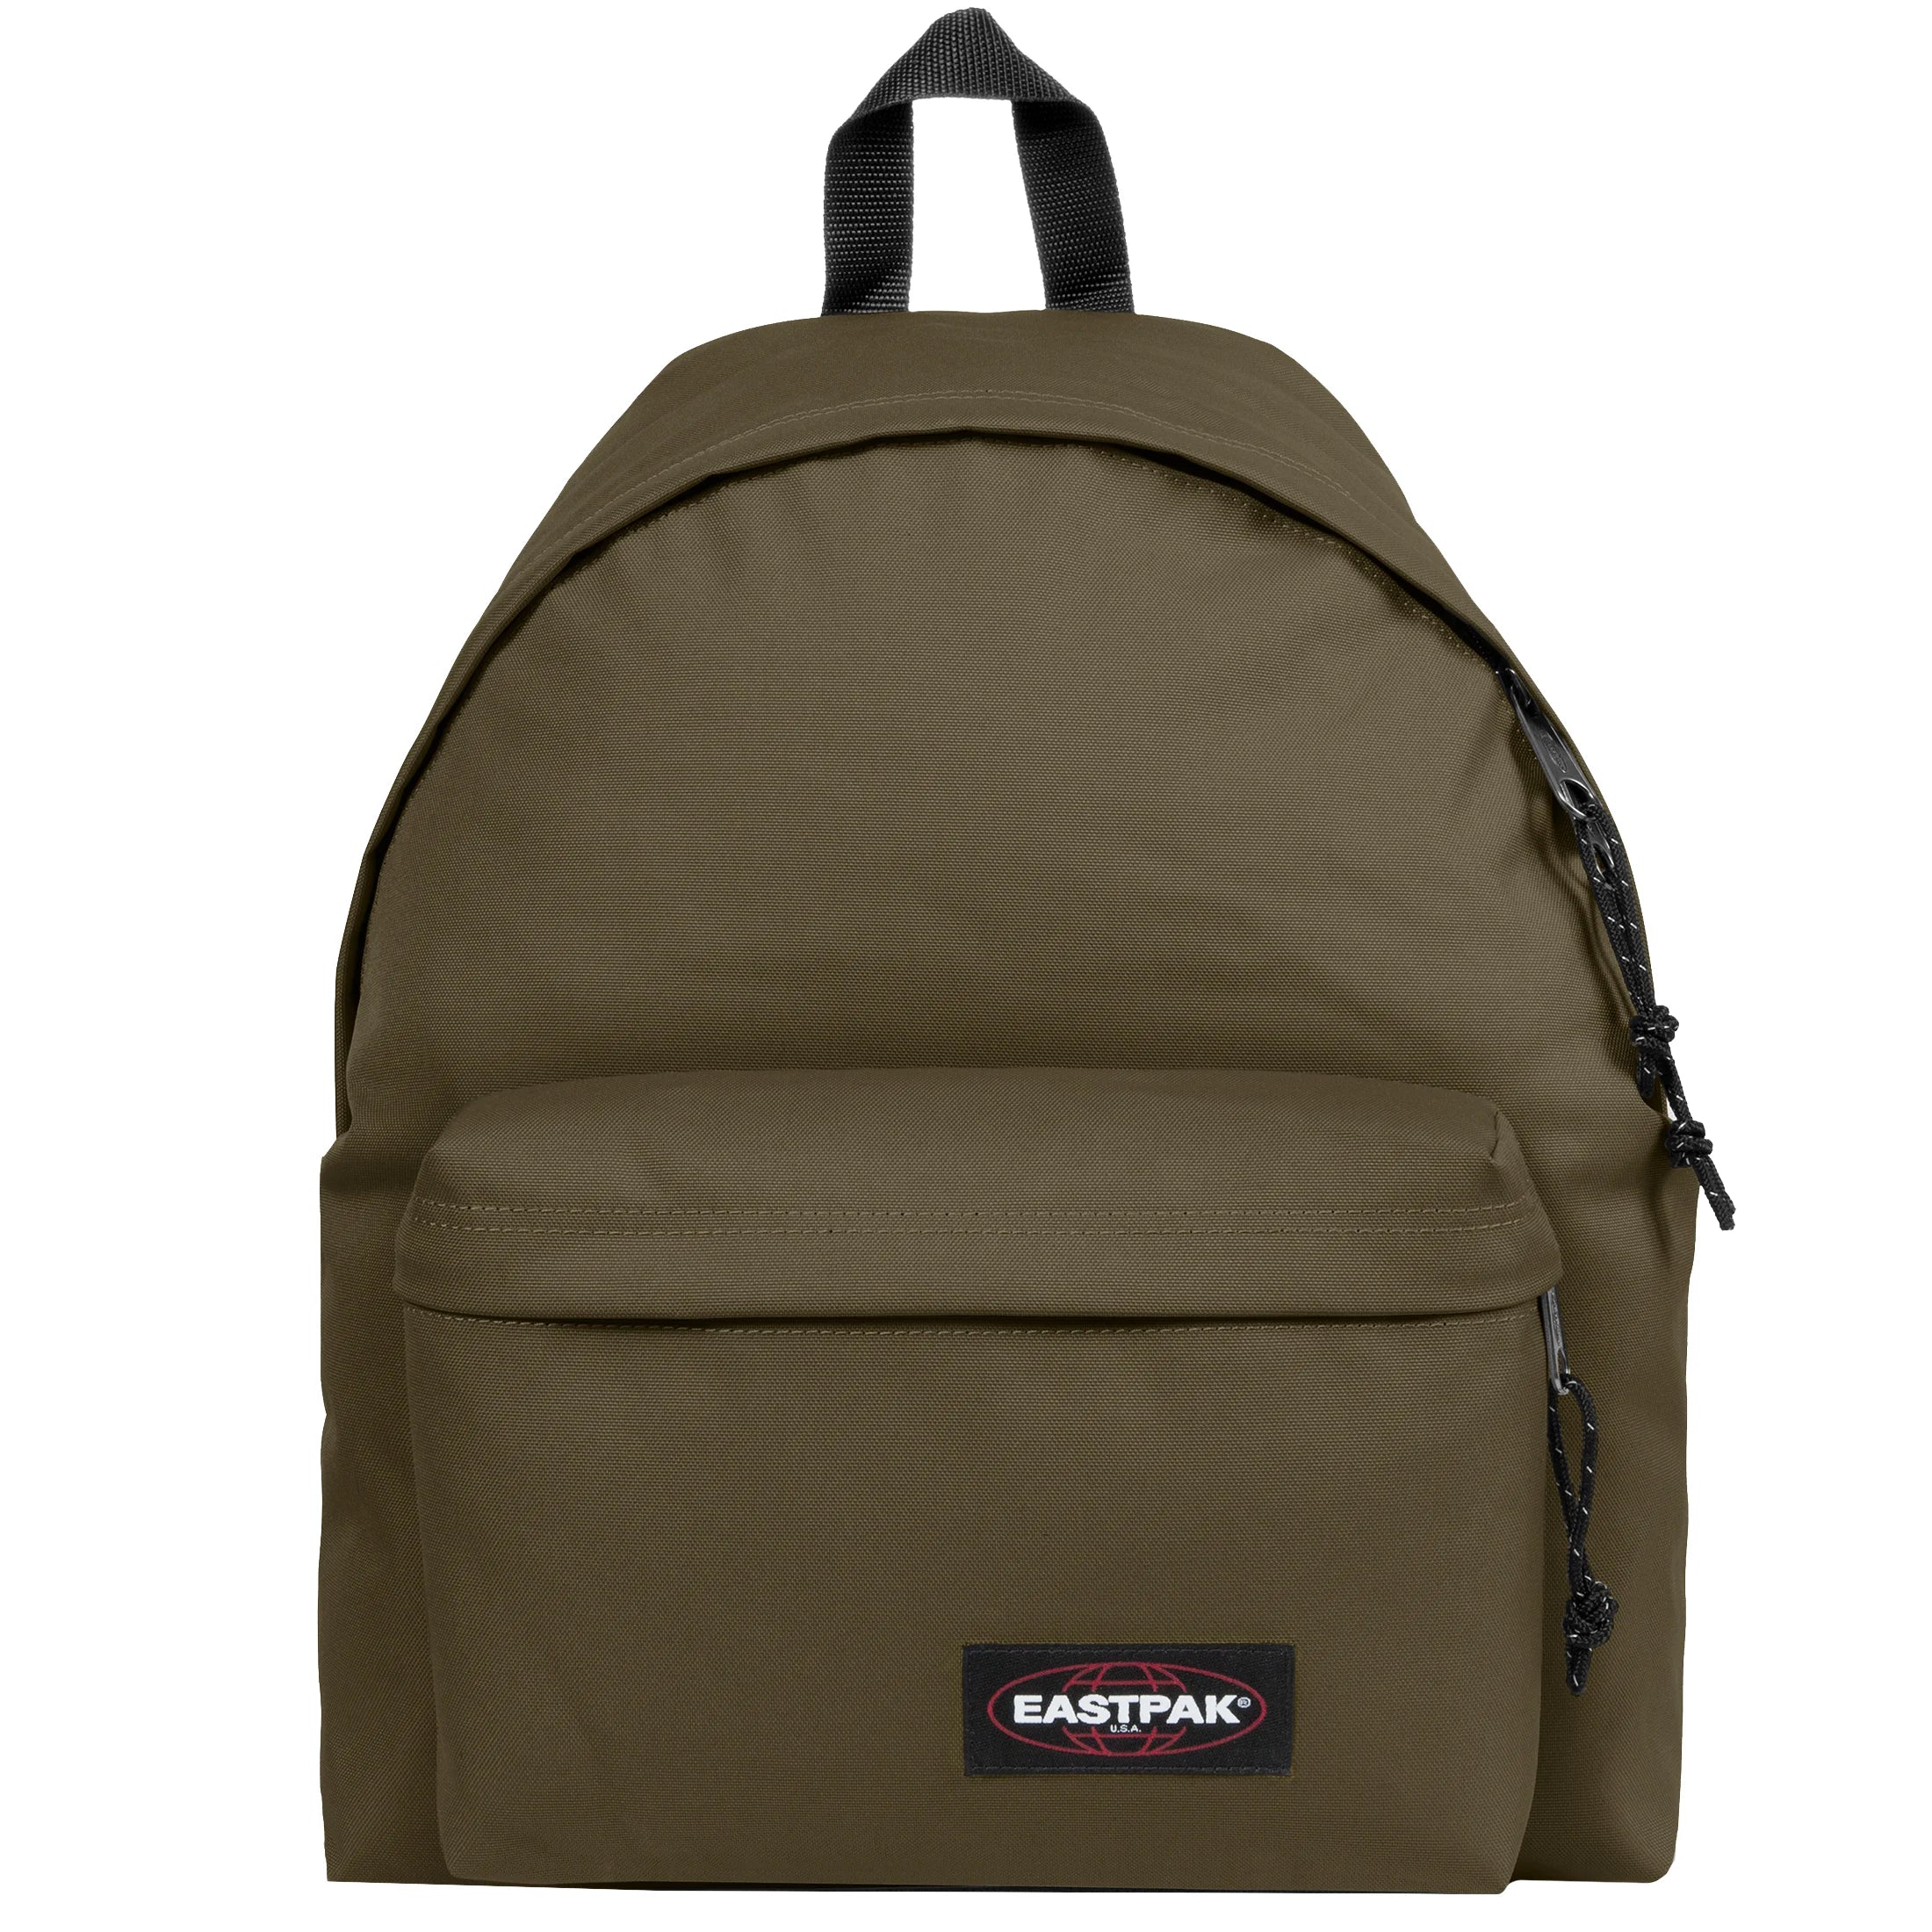 Eastpak Authentic Padded Pak'r leisure backpack 41 cm - Army Olive